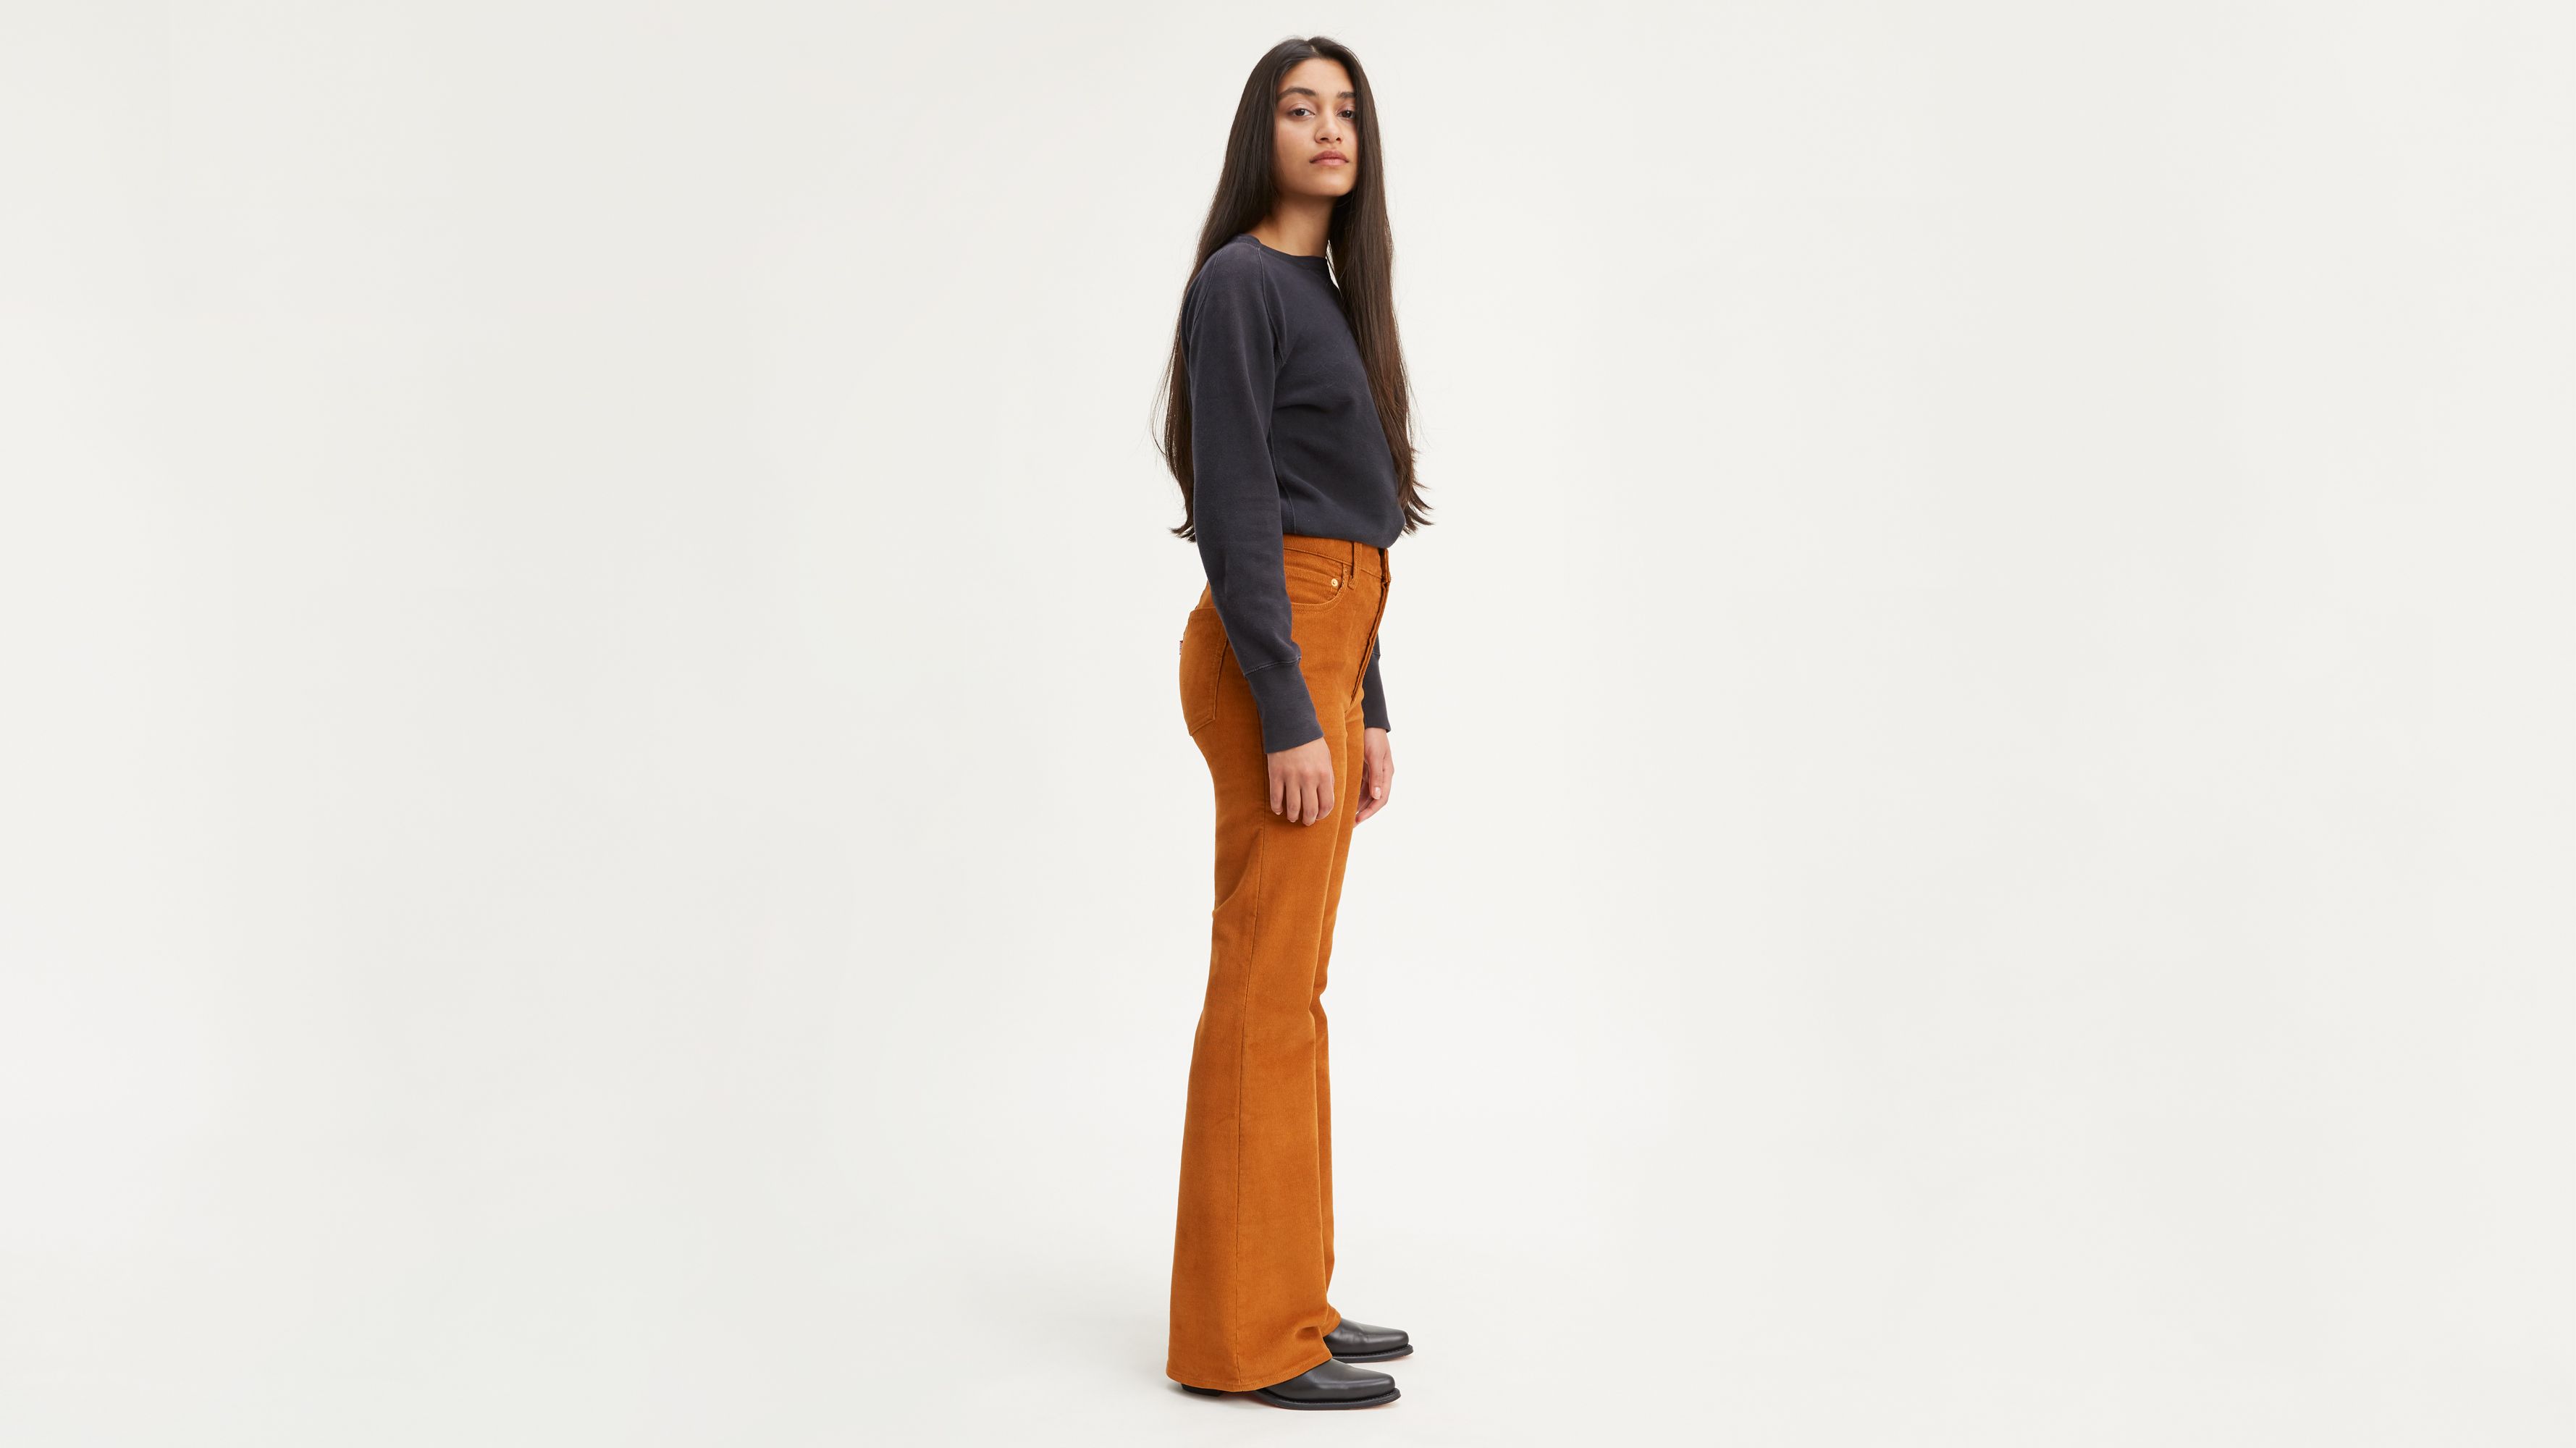 City trousers in Midnight (big cotton corduroy) – Just in Case